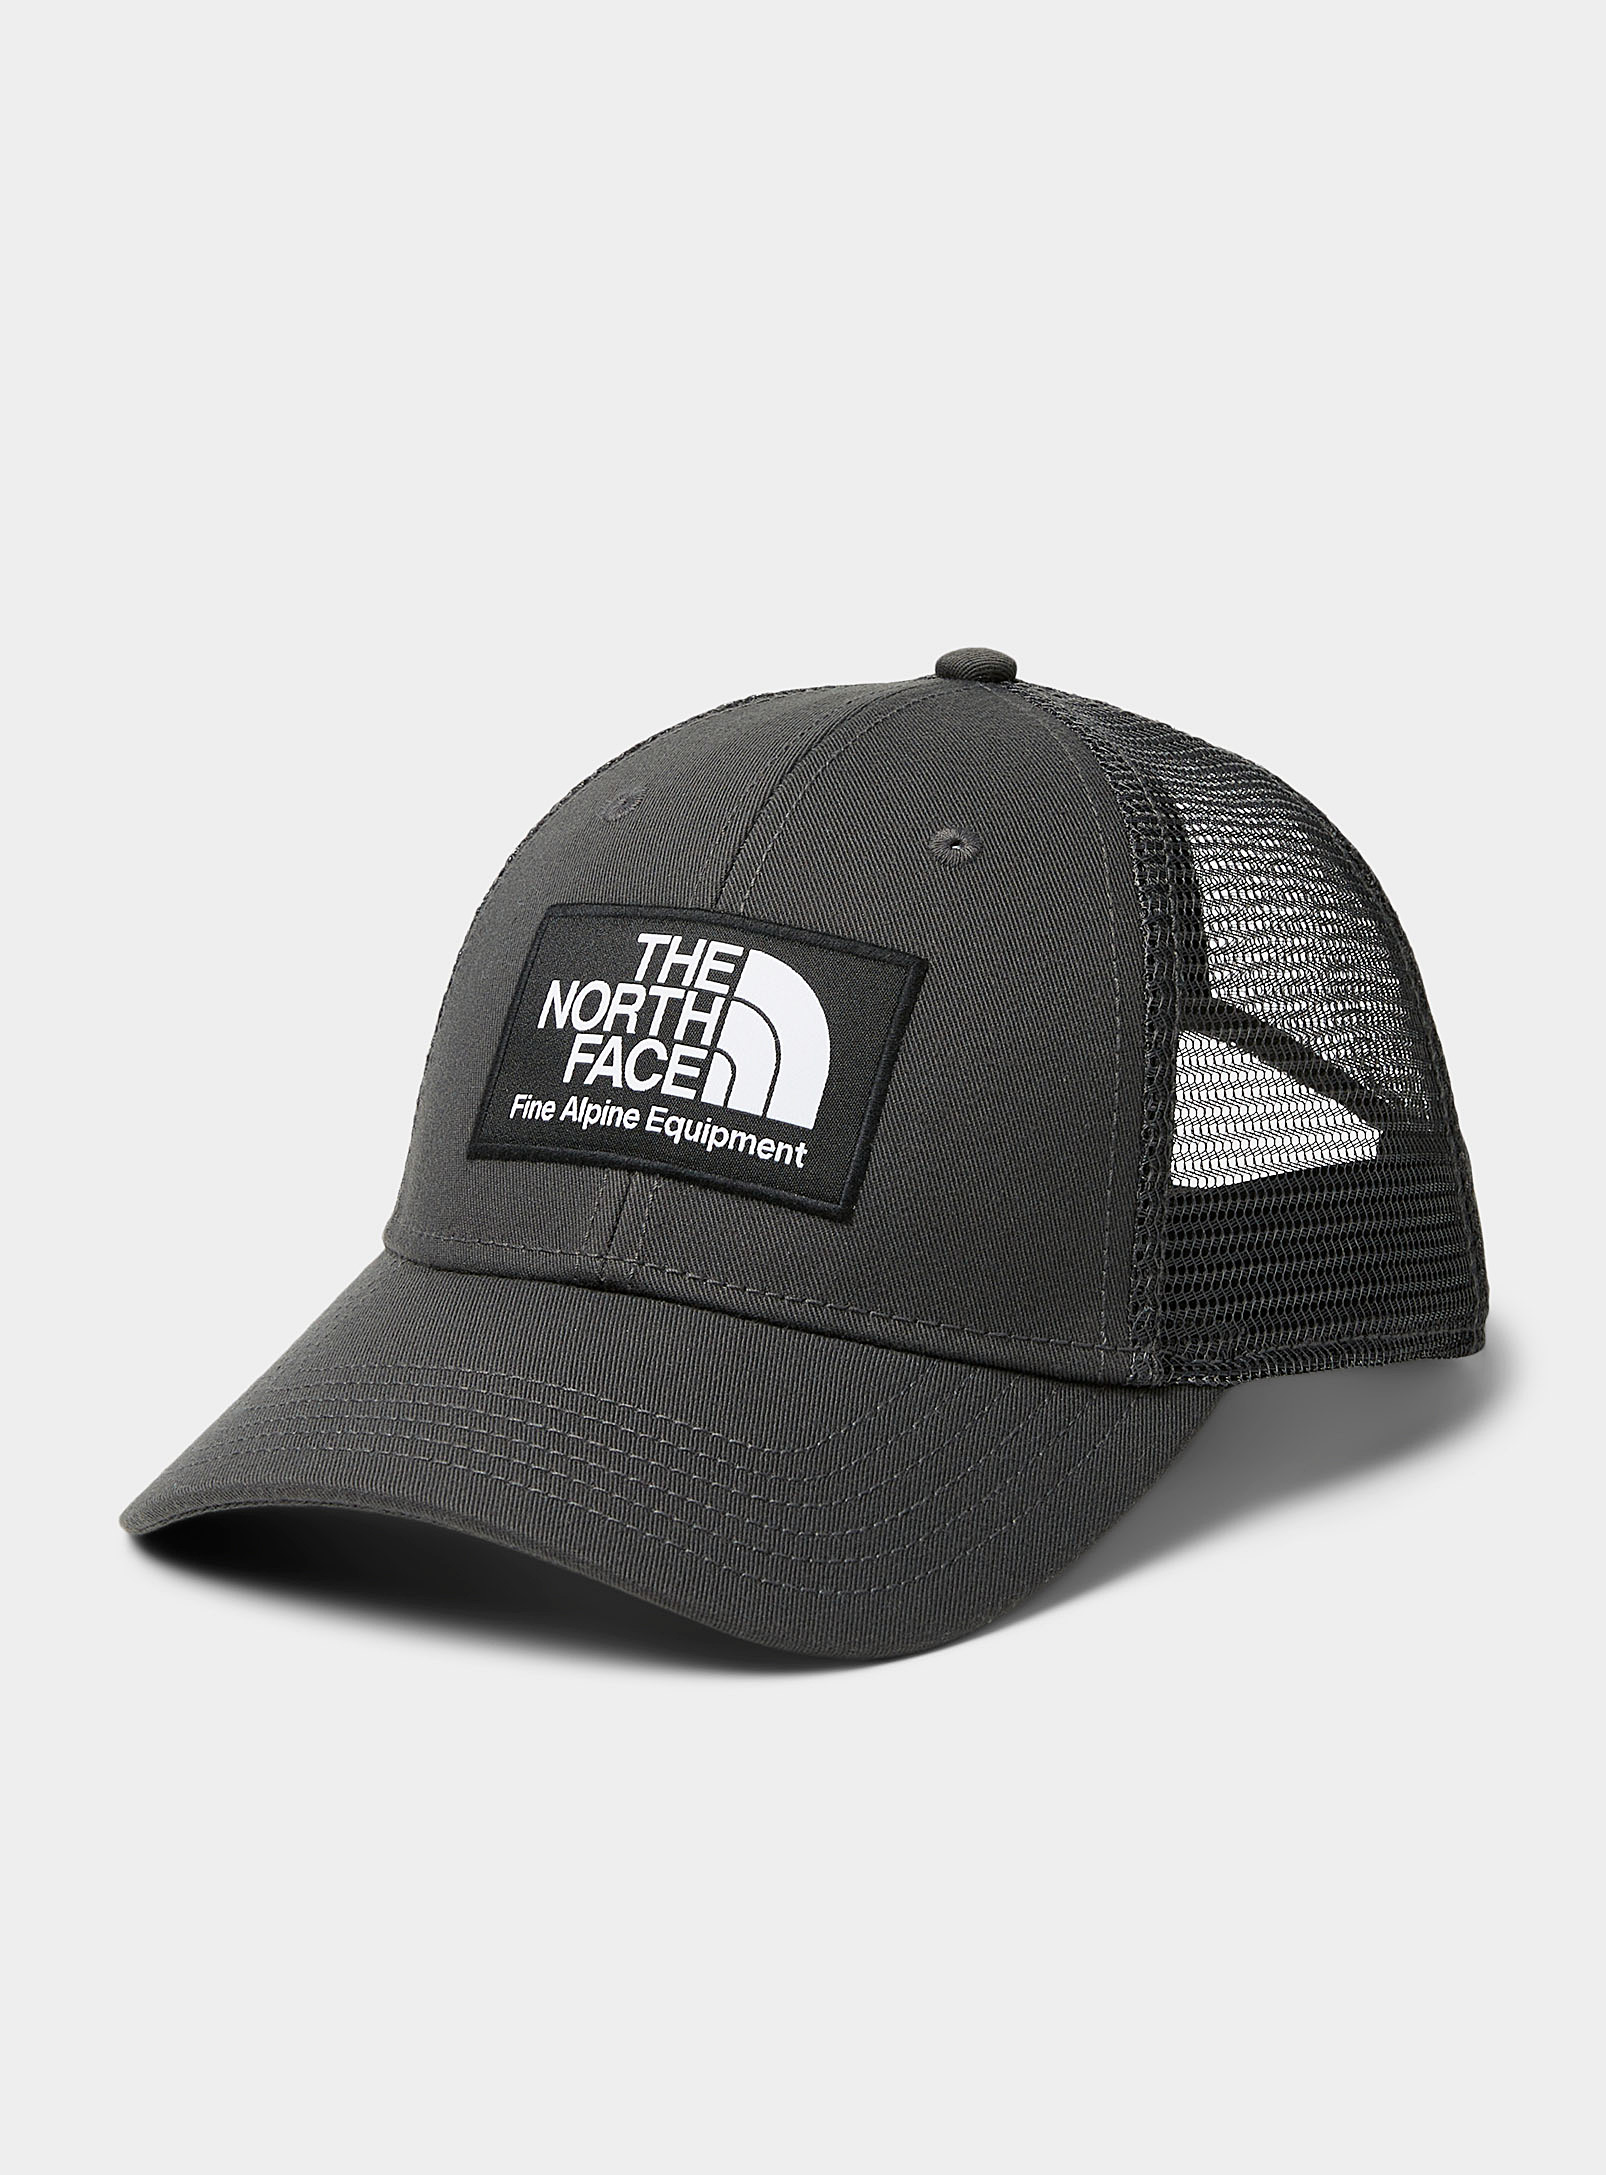 The North Face Mudder Trucker Cap In Black